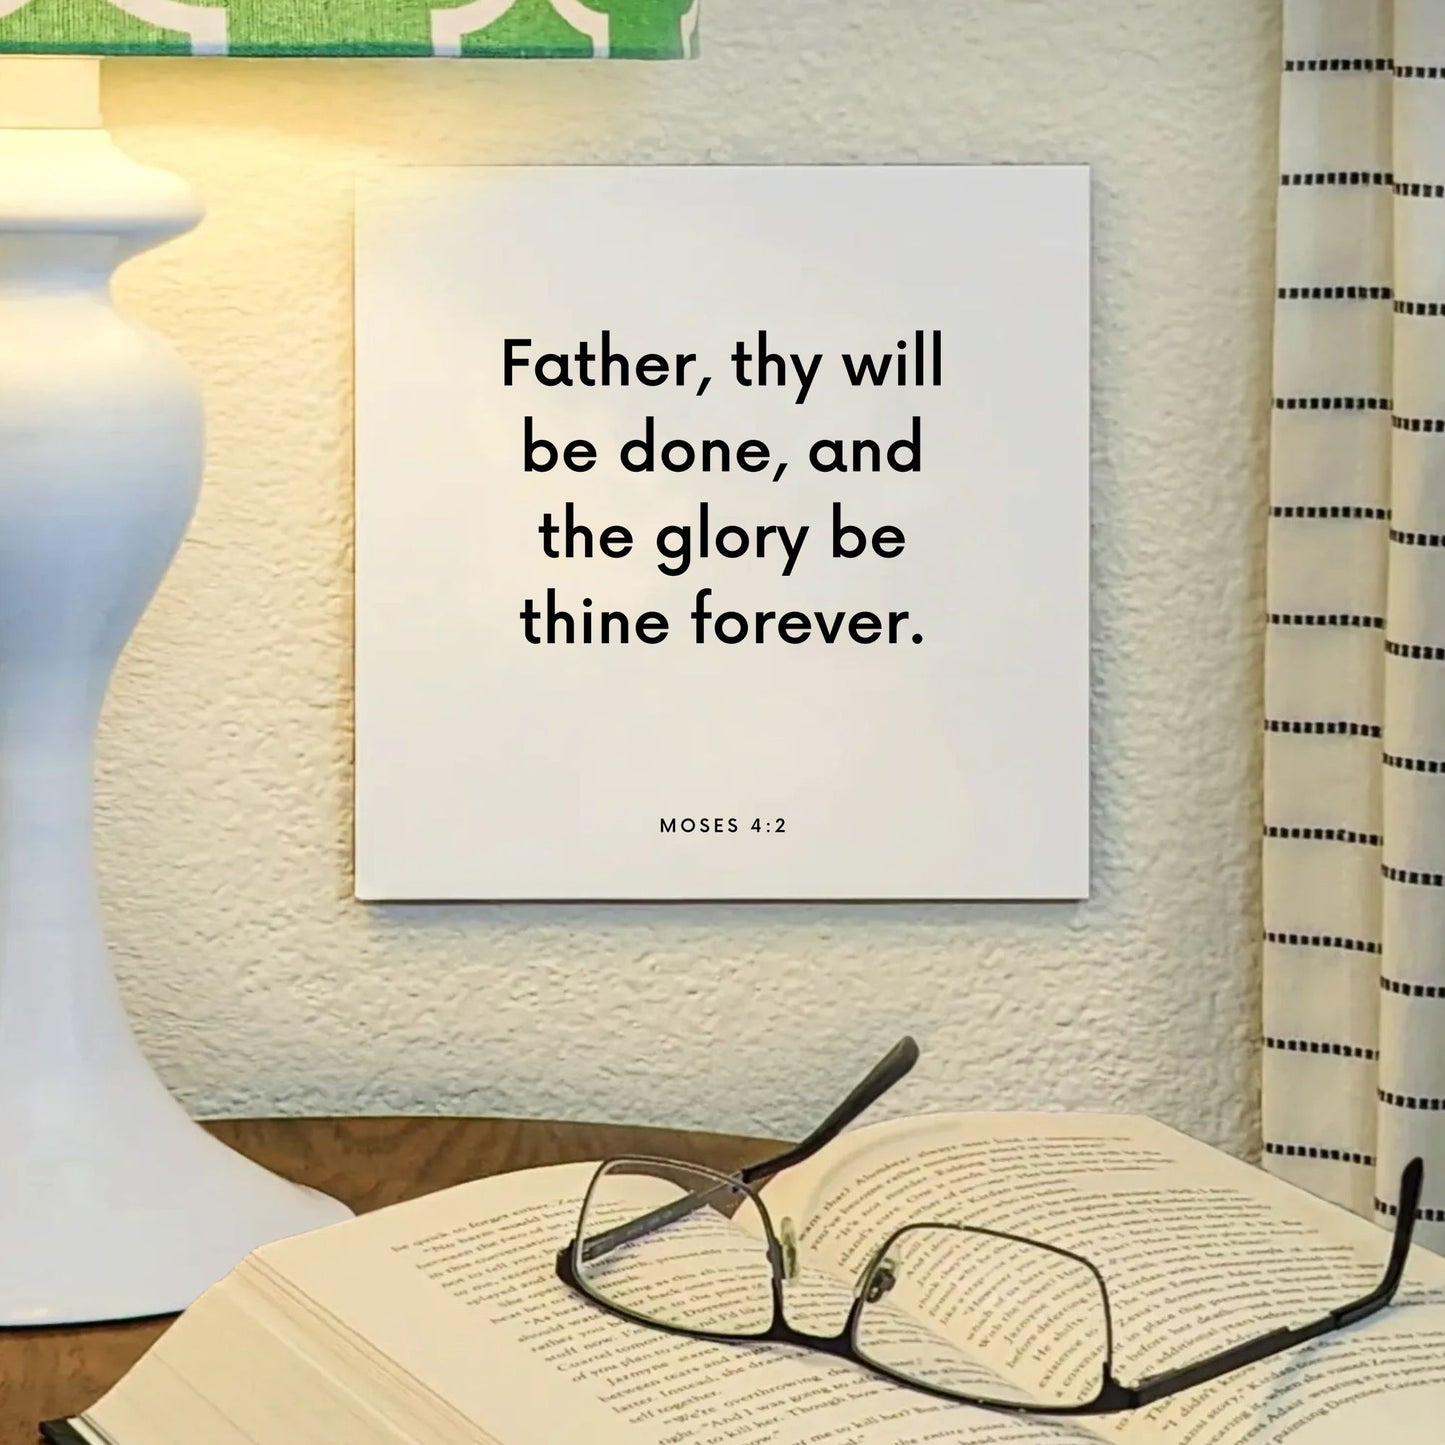 Lamp mouting of the scripture tile for Moses 4:2 - "Father, thy will be done, and the glory be thine forever"